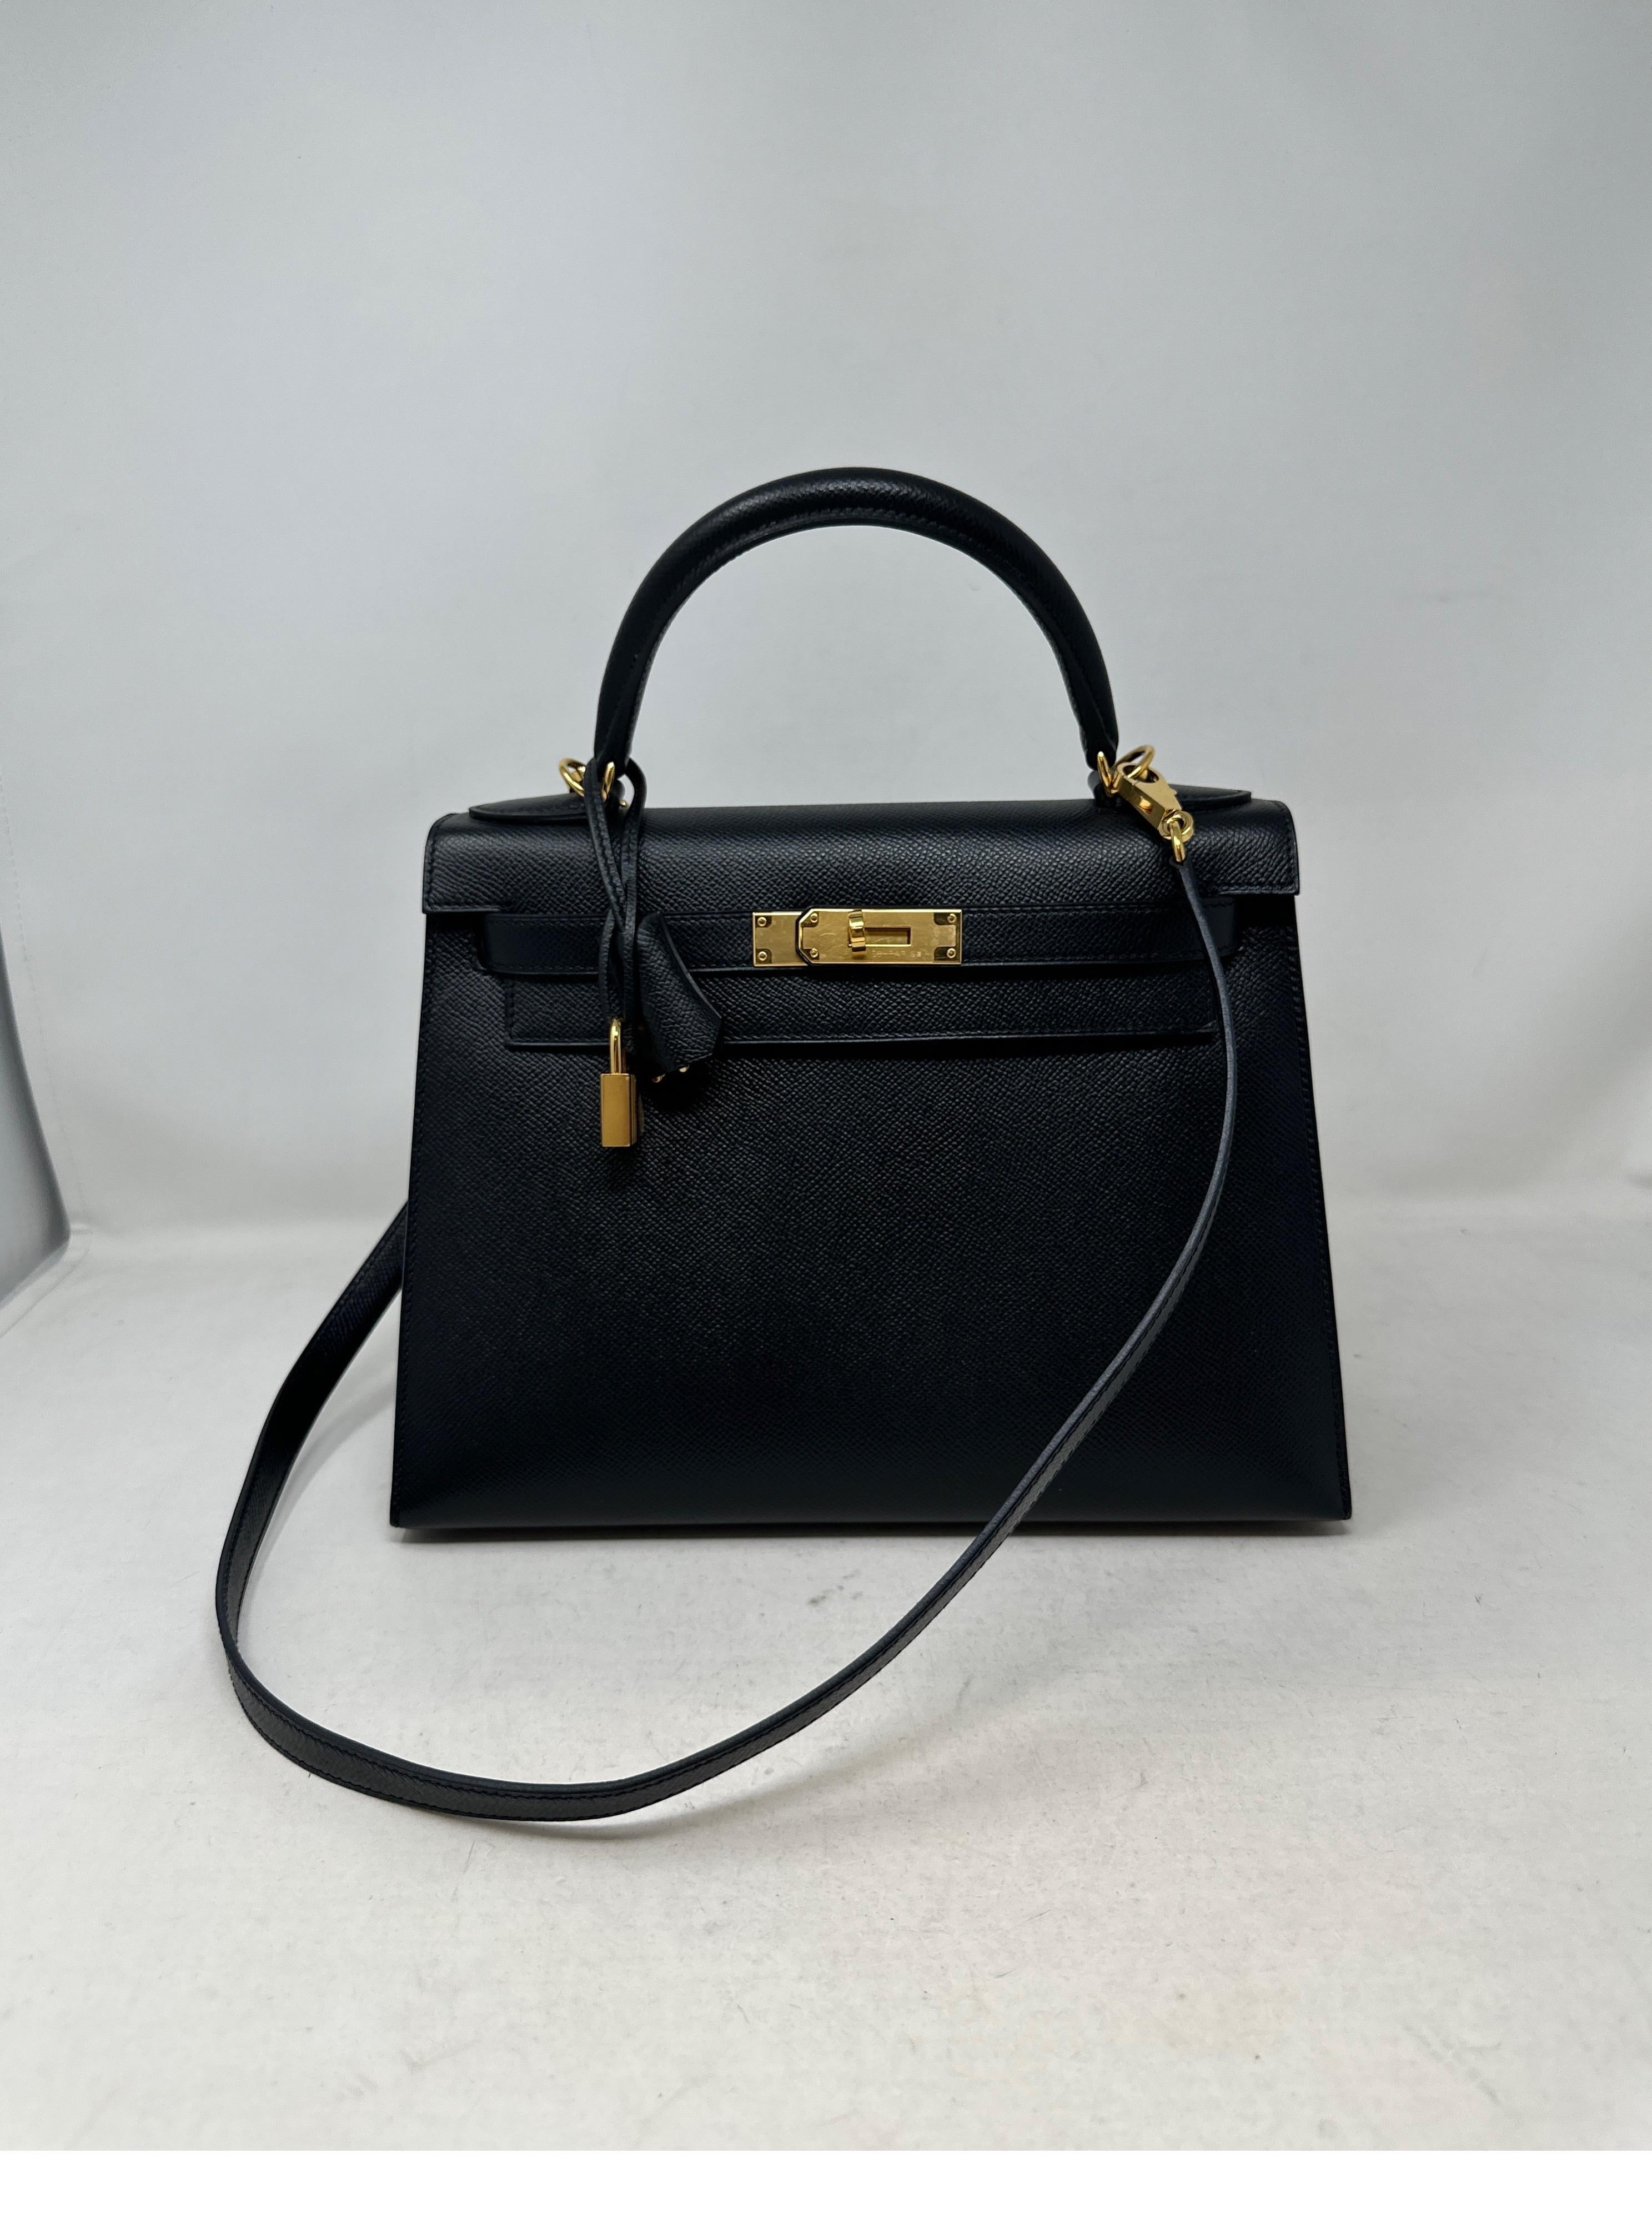 Hermes Black Kelly 28 Bag. Sellier epsom leather in excellent like new condition. Gold hardware. Most wanted smaller size with gold hardware. Black goes with everything. Great investment bag. Includes clochette, lock, keys, and dust bag. Guaranteed